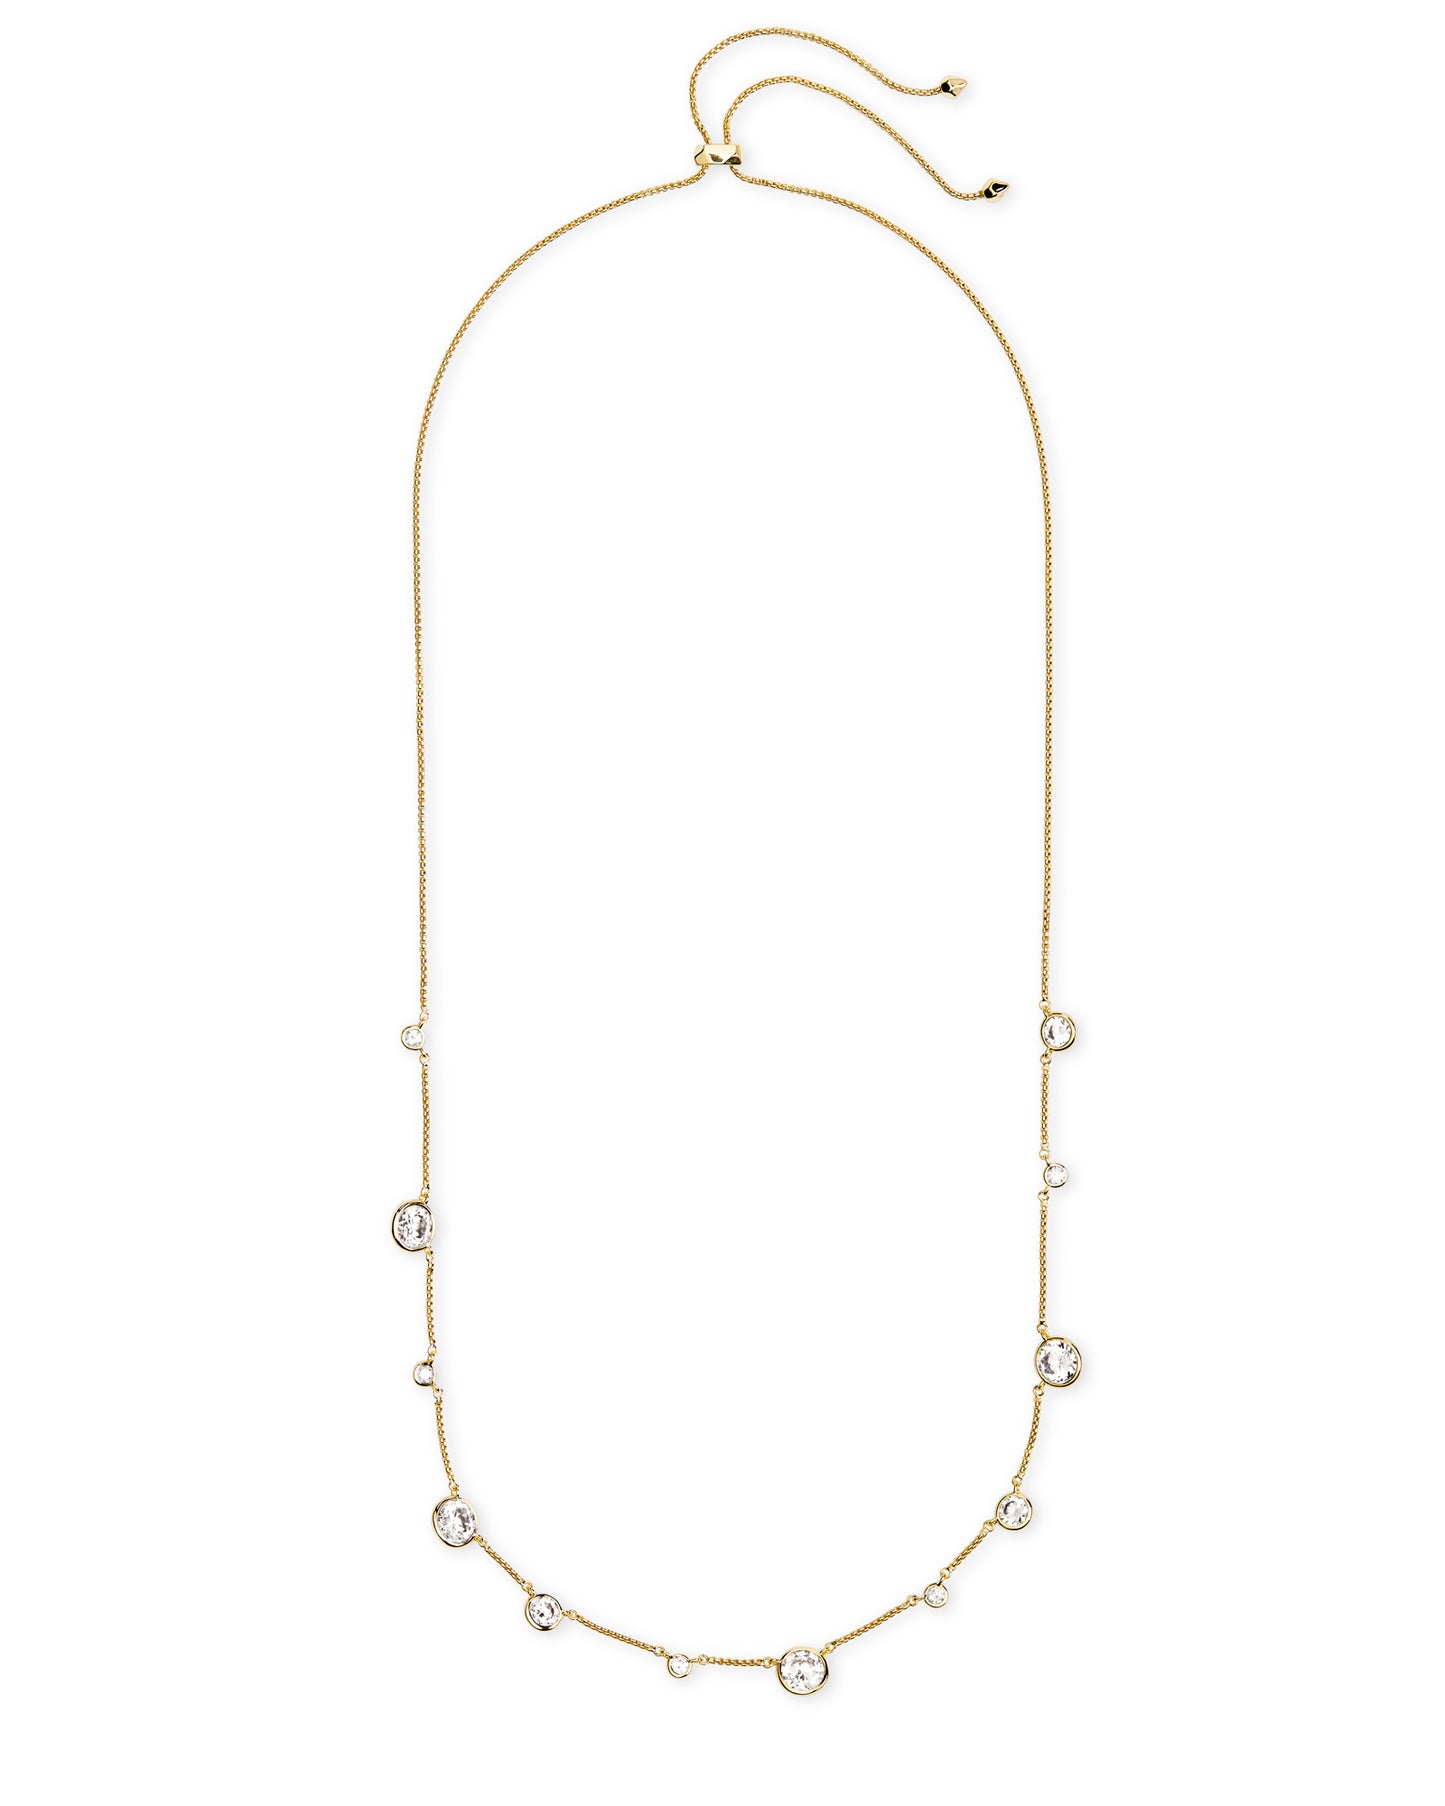 Kendra Scott: Clementine Necklace in Gold